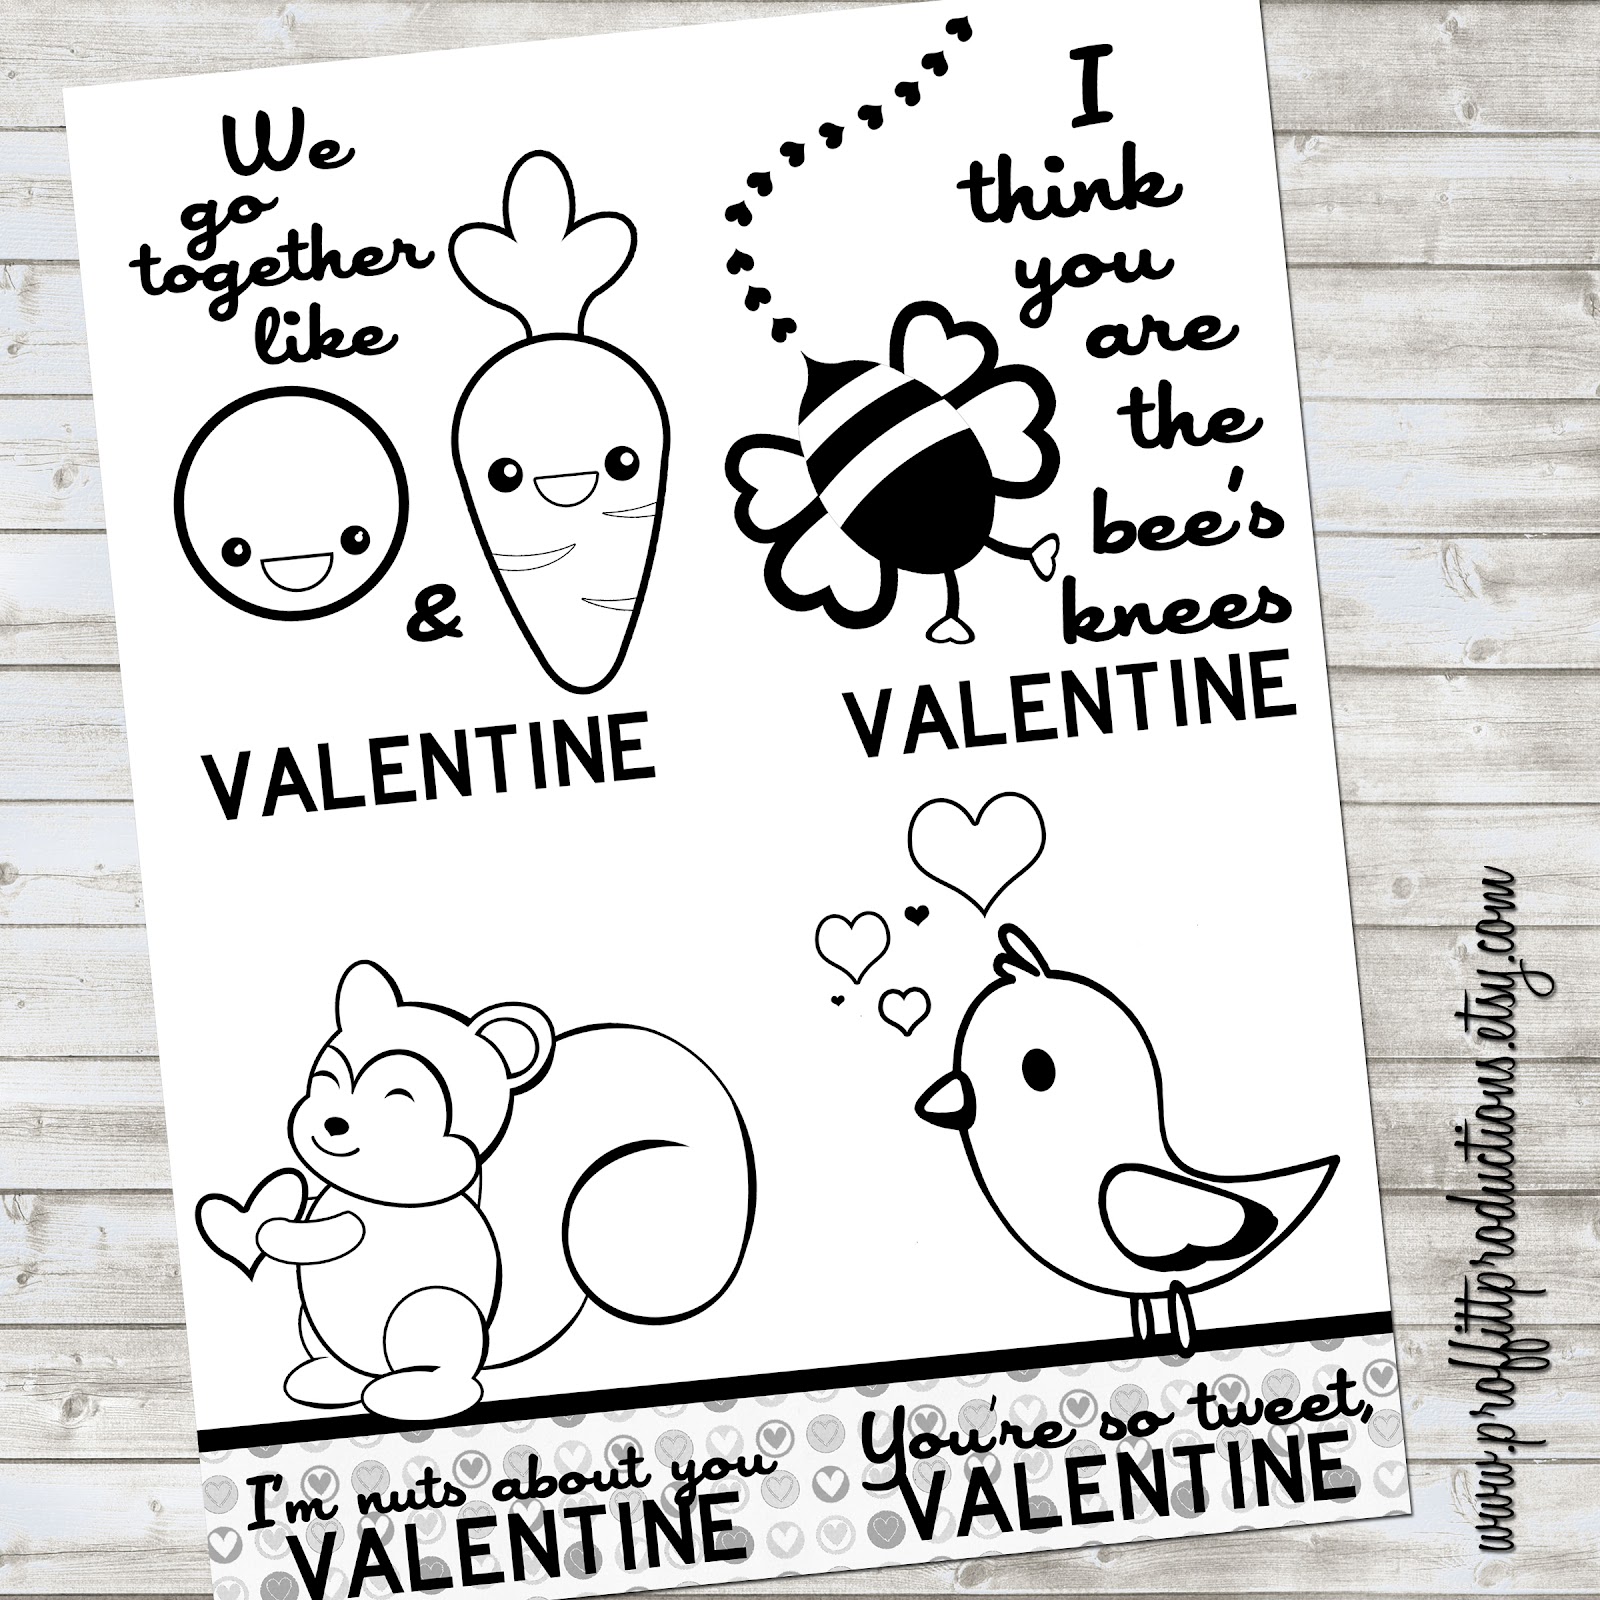 Funny Pictures Gallery: Valentines day sayings for kids, valentines day sayings